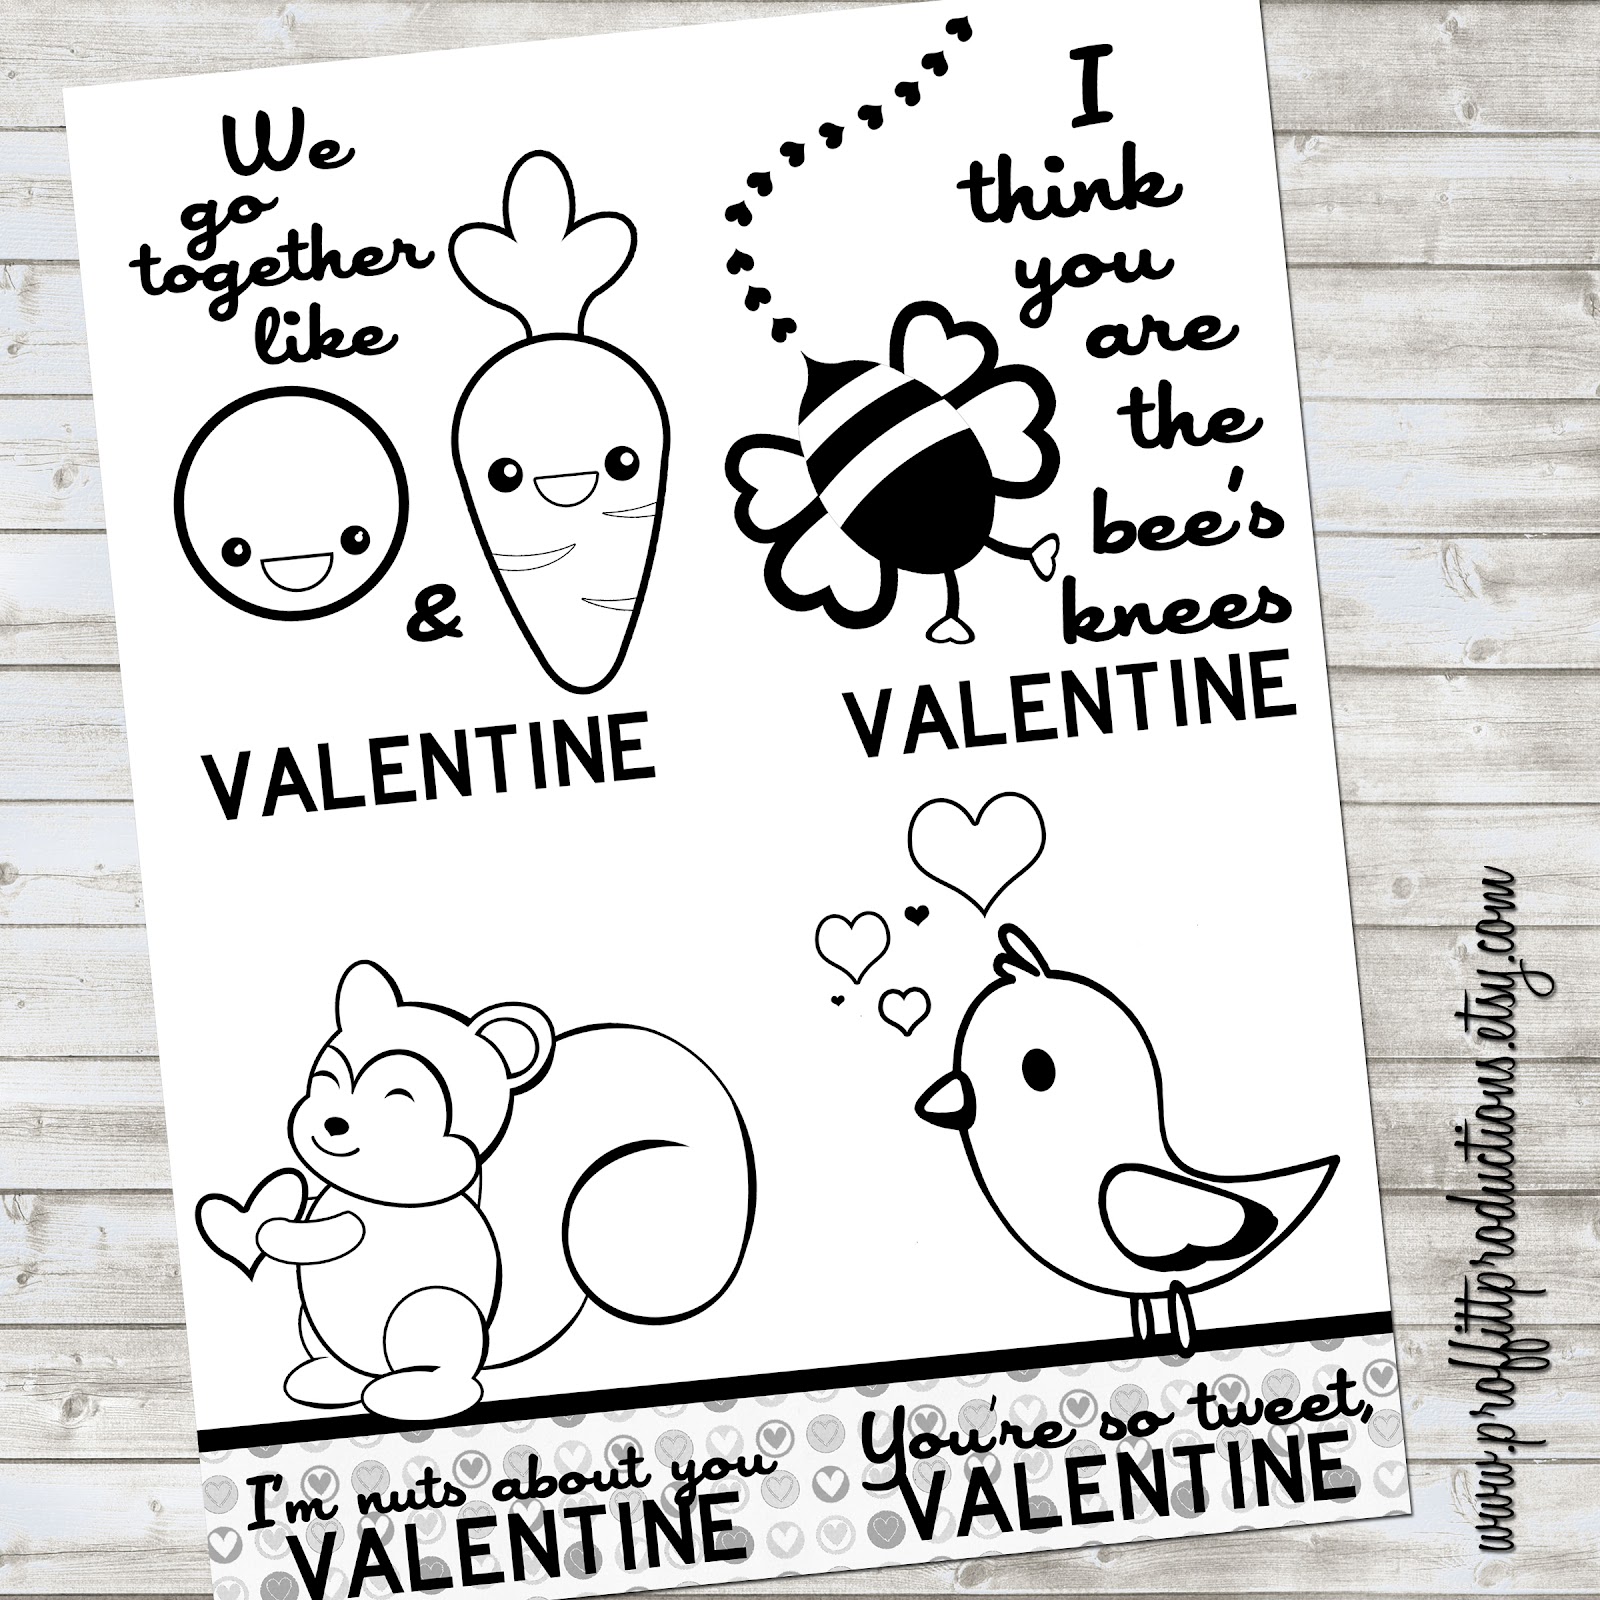 Funny Pictures Gallery: Valentines day sayings for kids, valentines day sayings